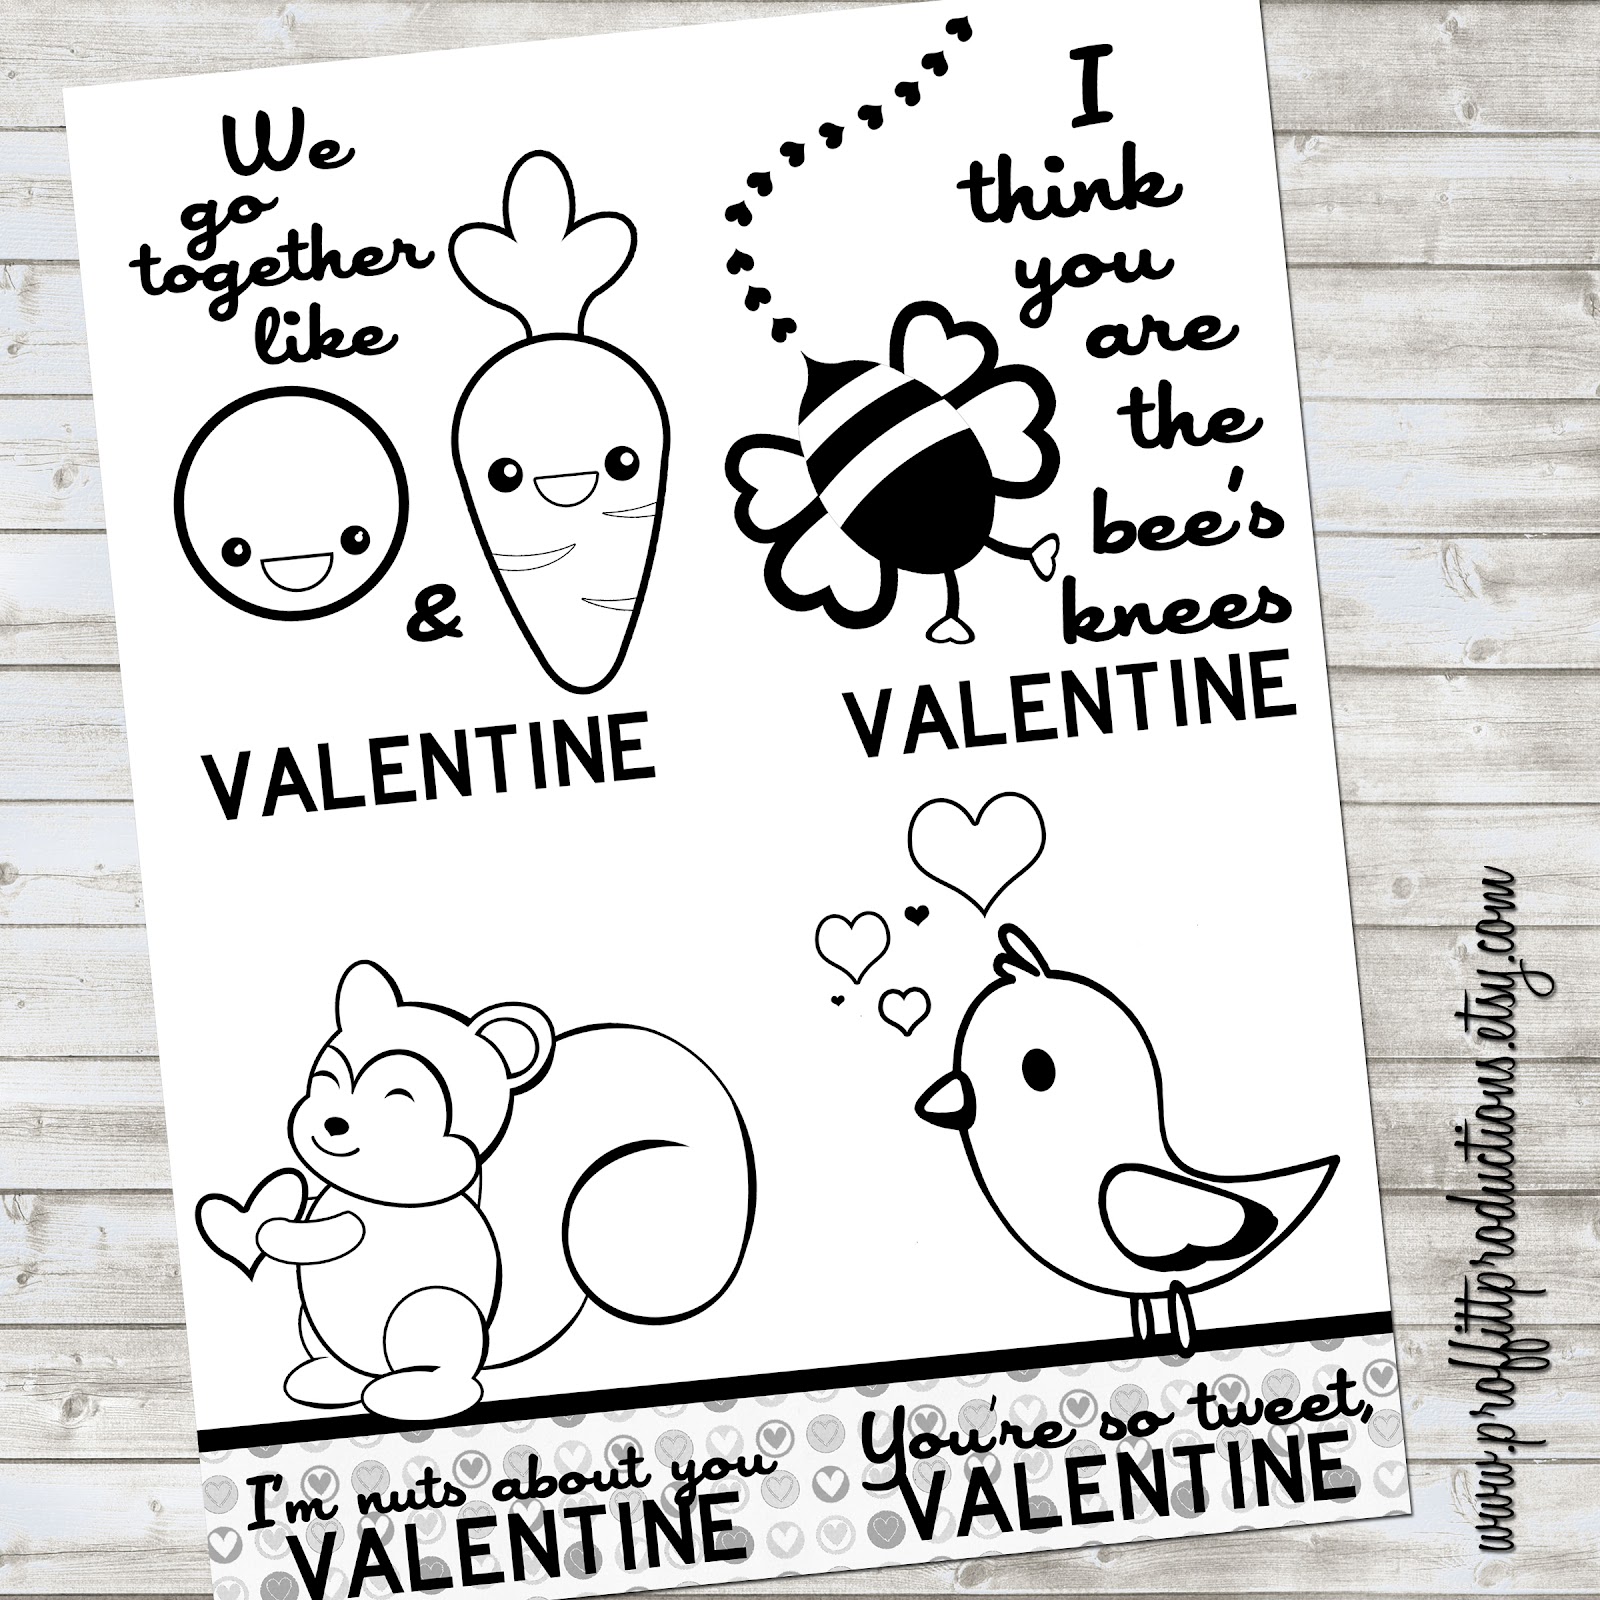 Funny Pictures Gallery: Valentines day sayings for kids, valentines day sayings